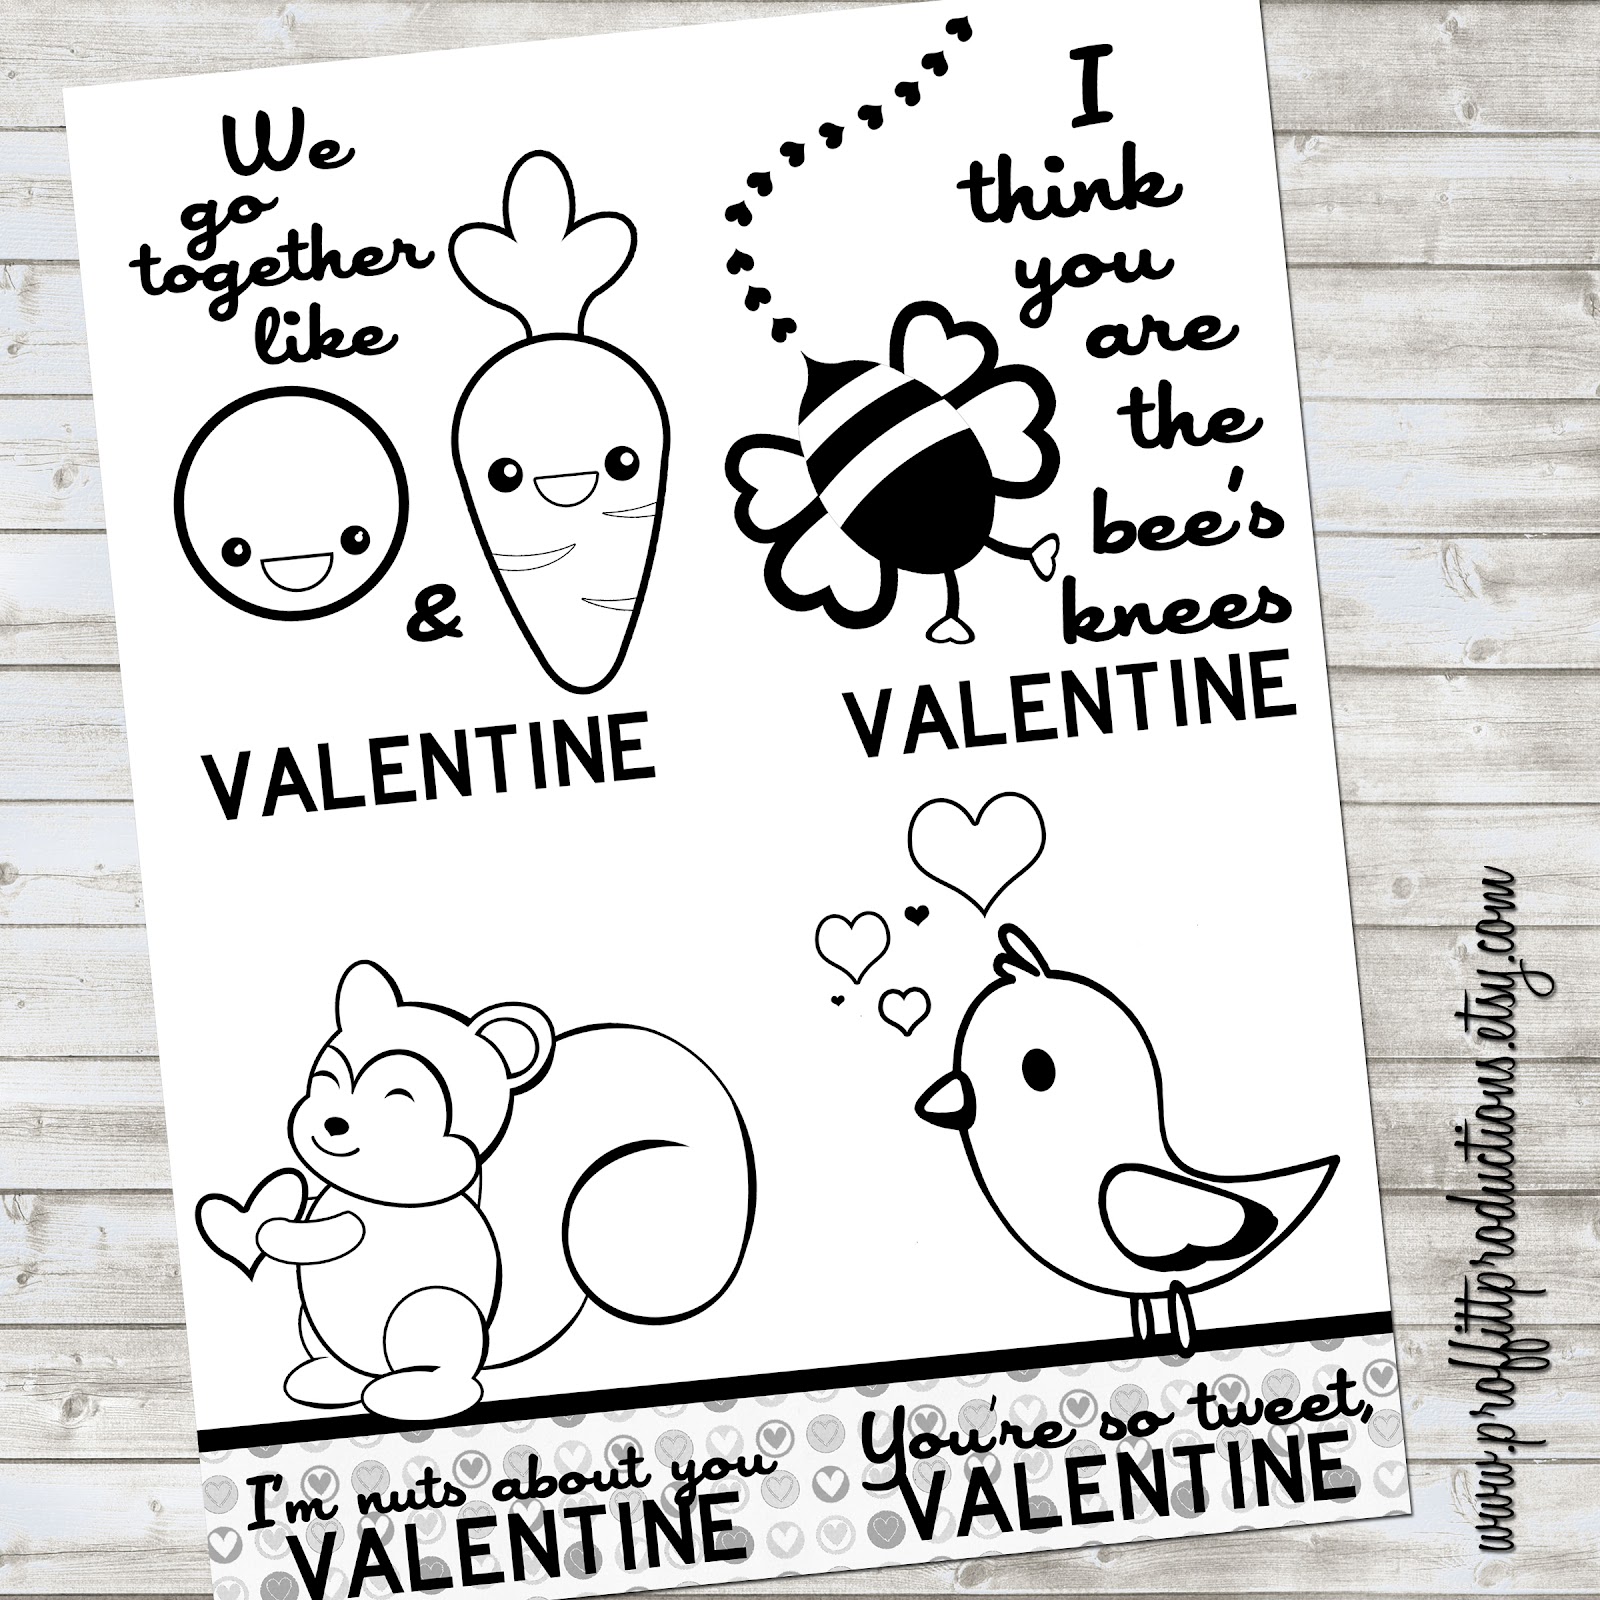 Funny Pictures Gallery: Valentines day sayings for kids, valentines day sayings